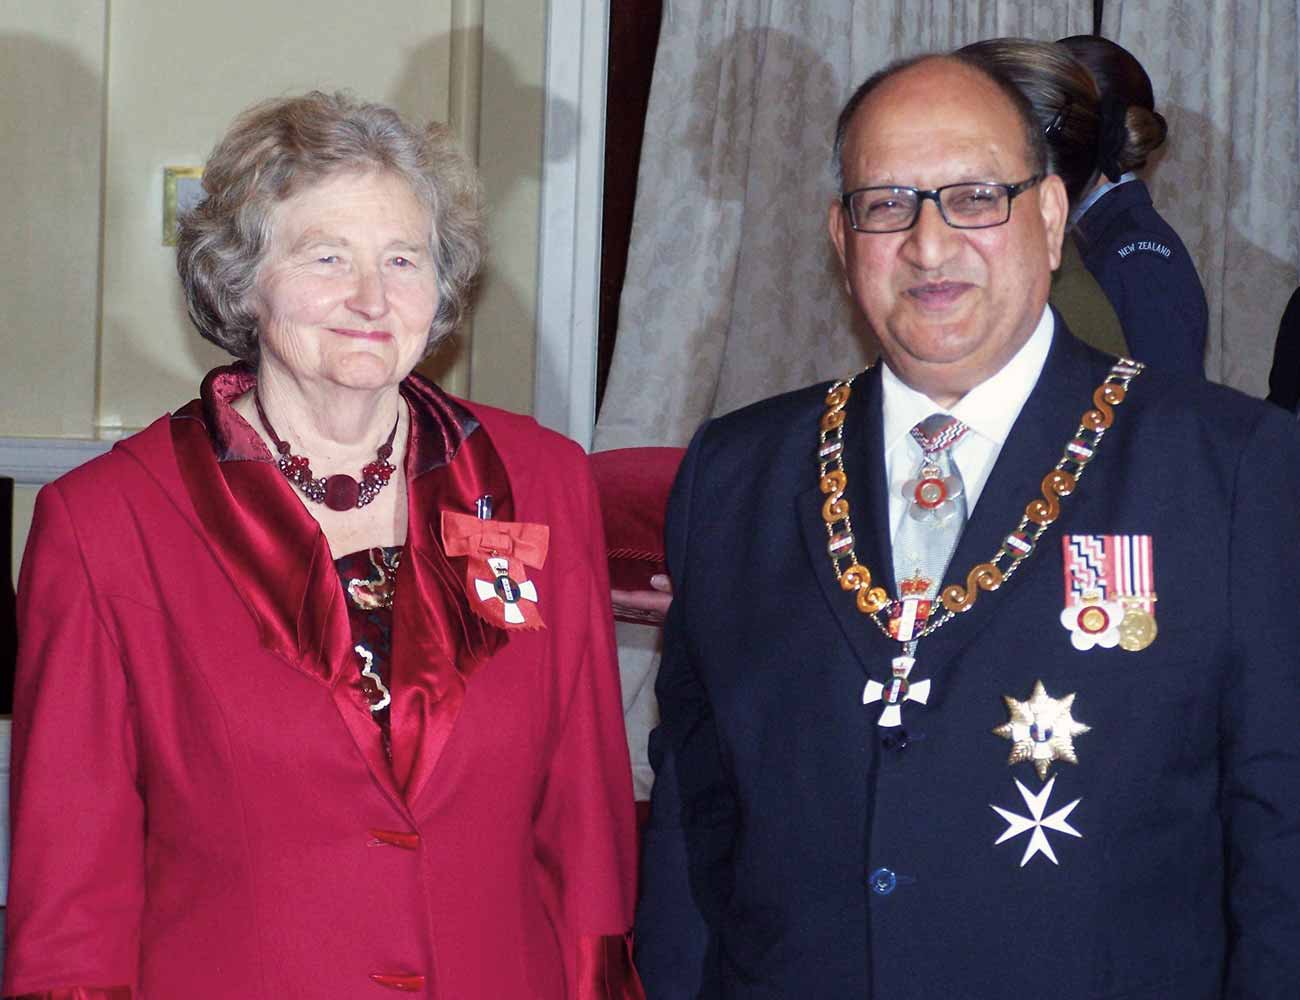 Dr Carol Shand received the Companion of the New Zealand Order of Merit in 2008